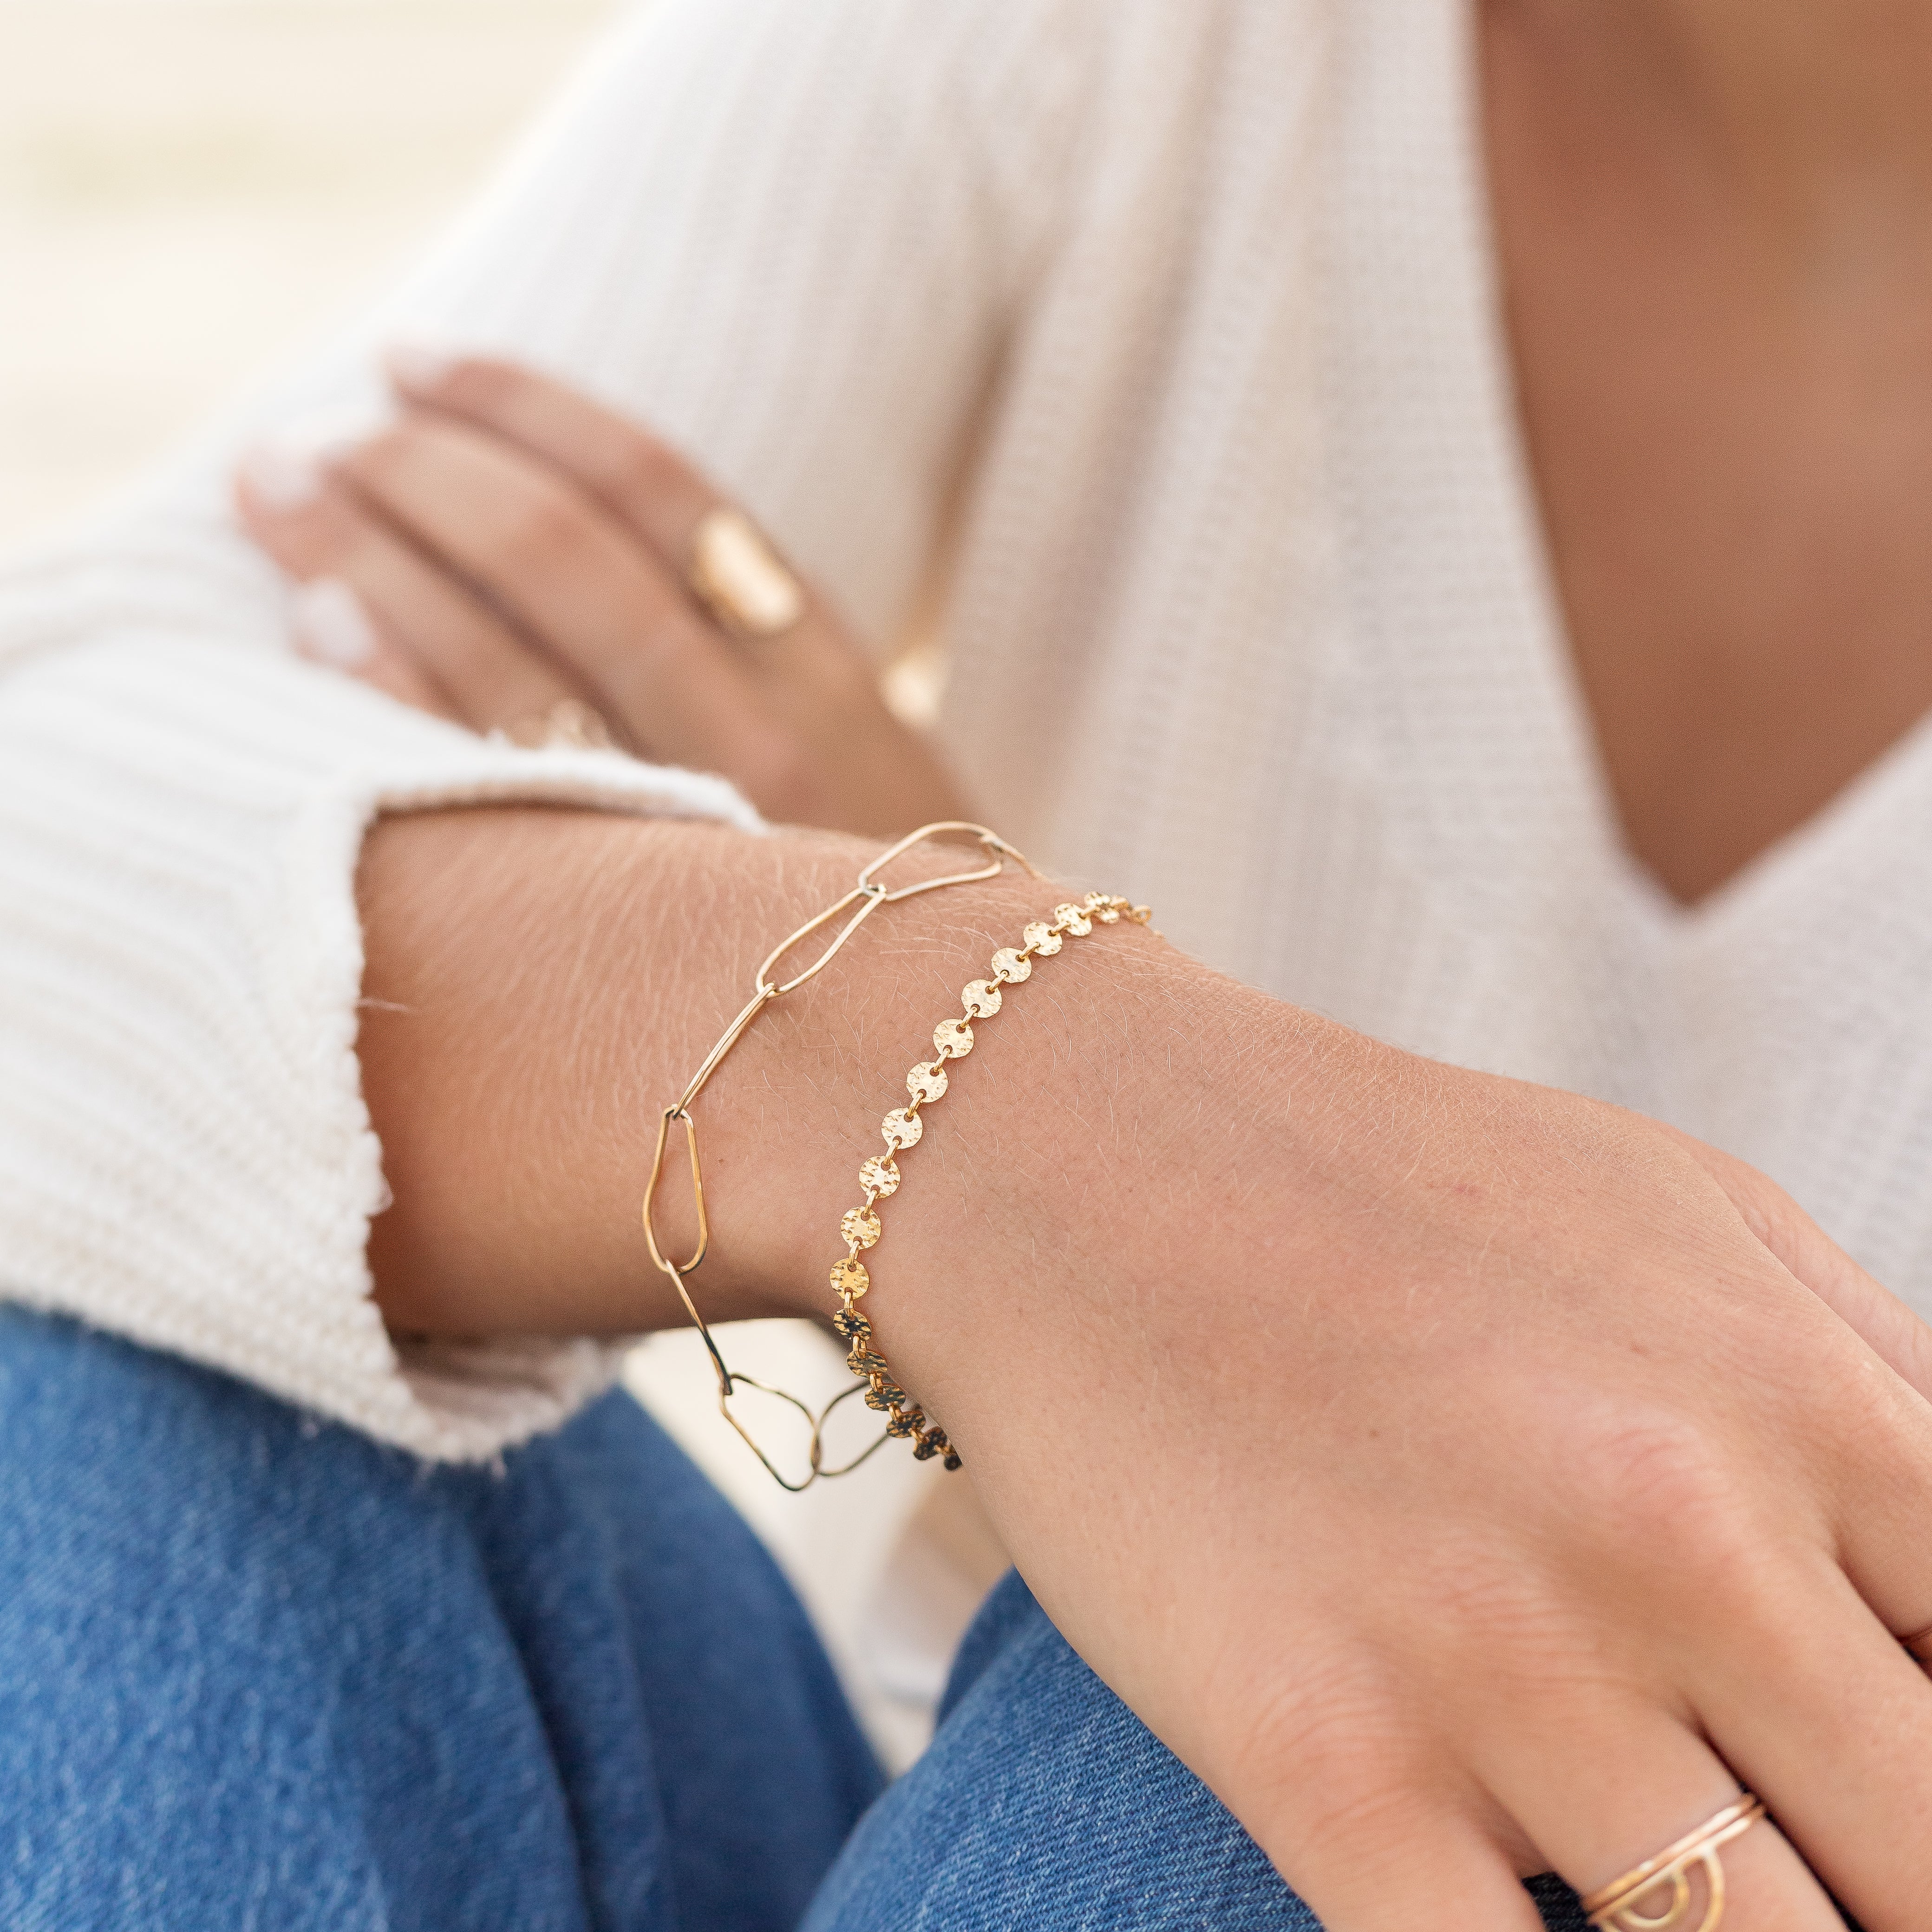 Dainty gold filled disk chain bracelet.  Shown with another gold bracelet on a woman's wrist.